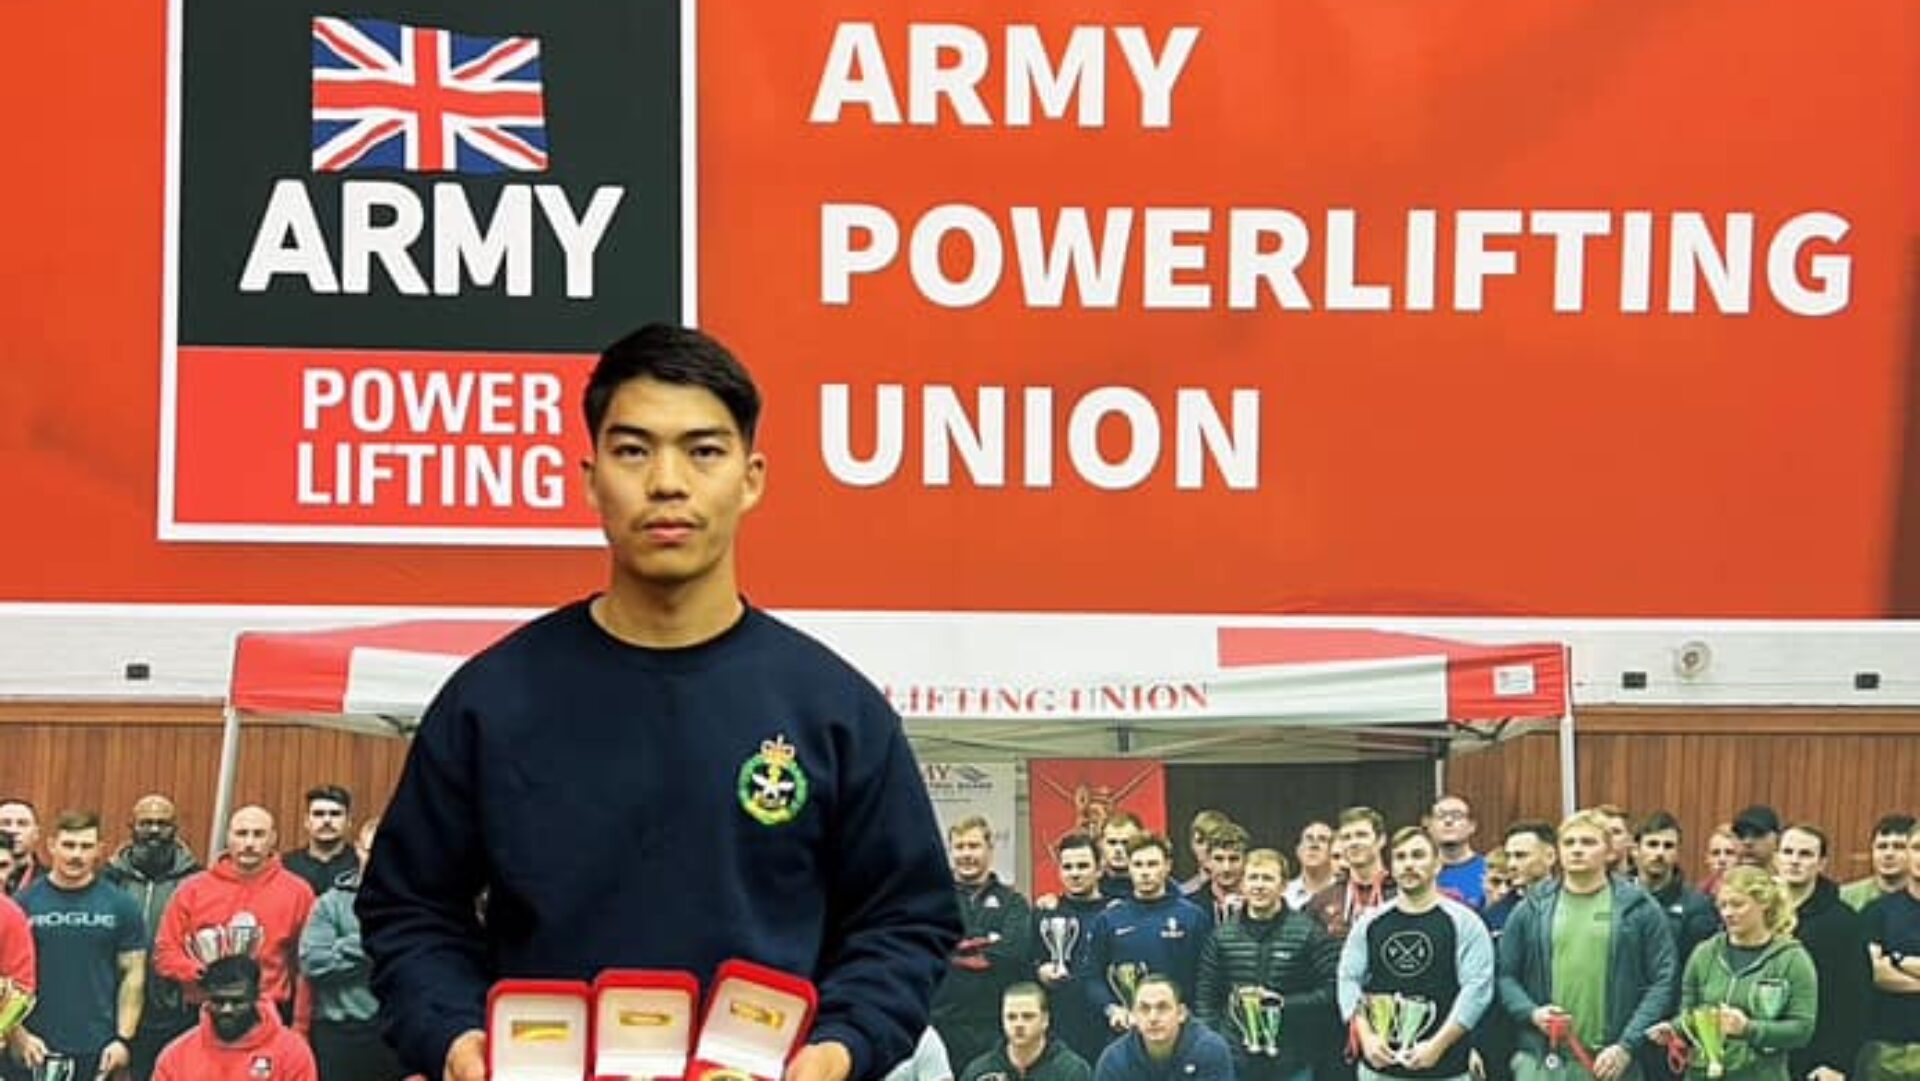 Gold medals in the Army Powerlifting Union